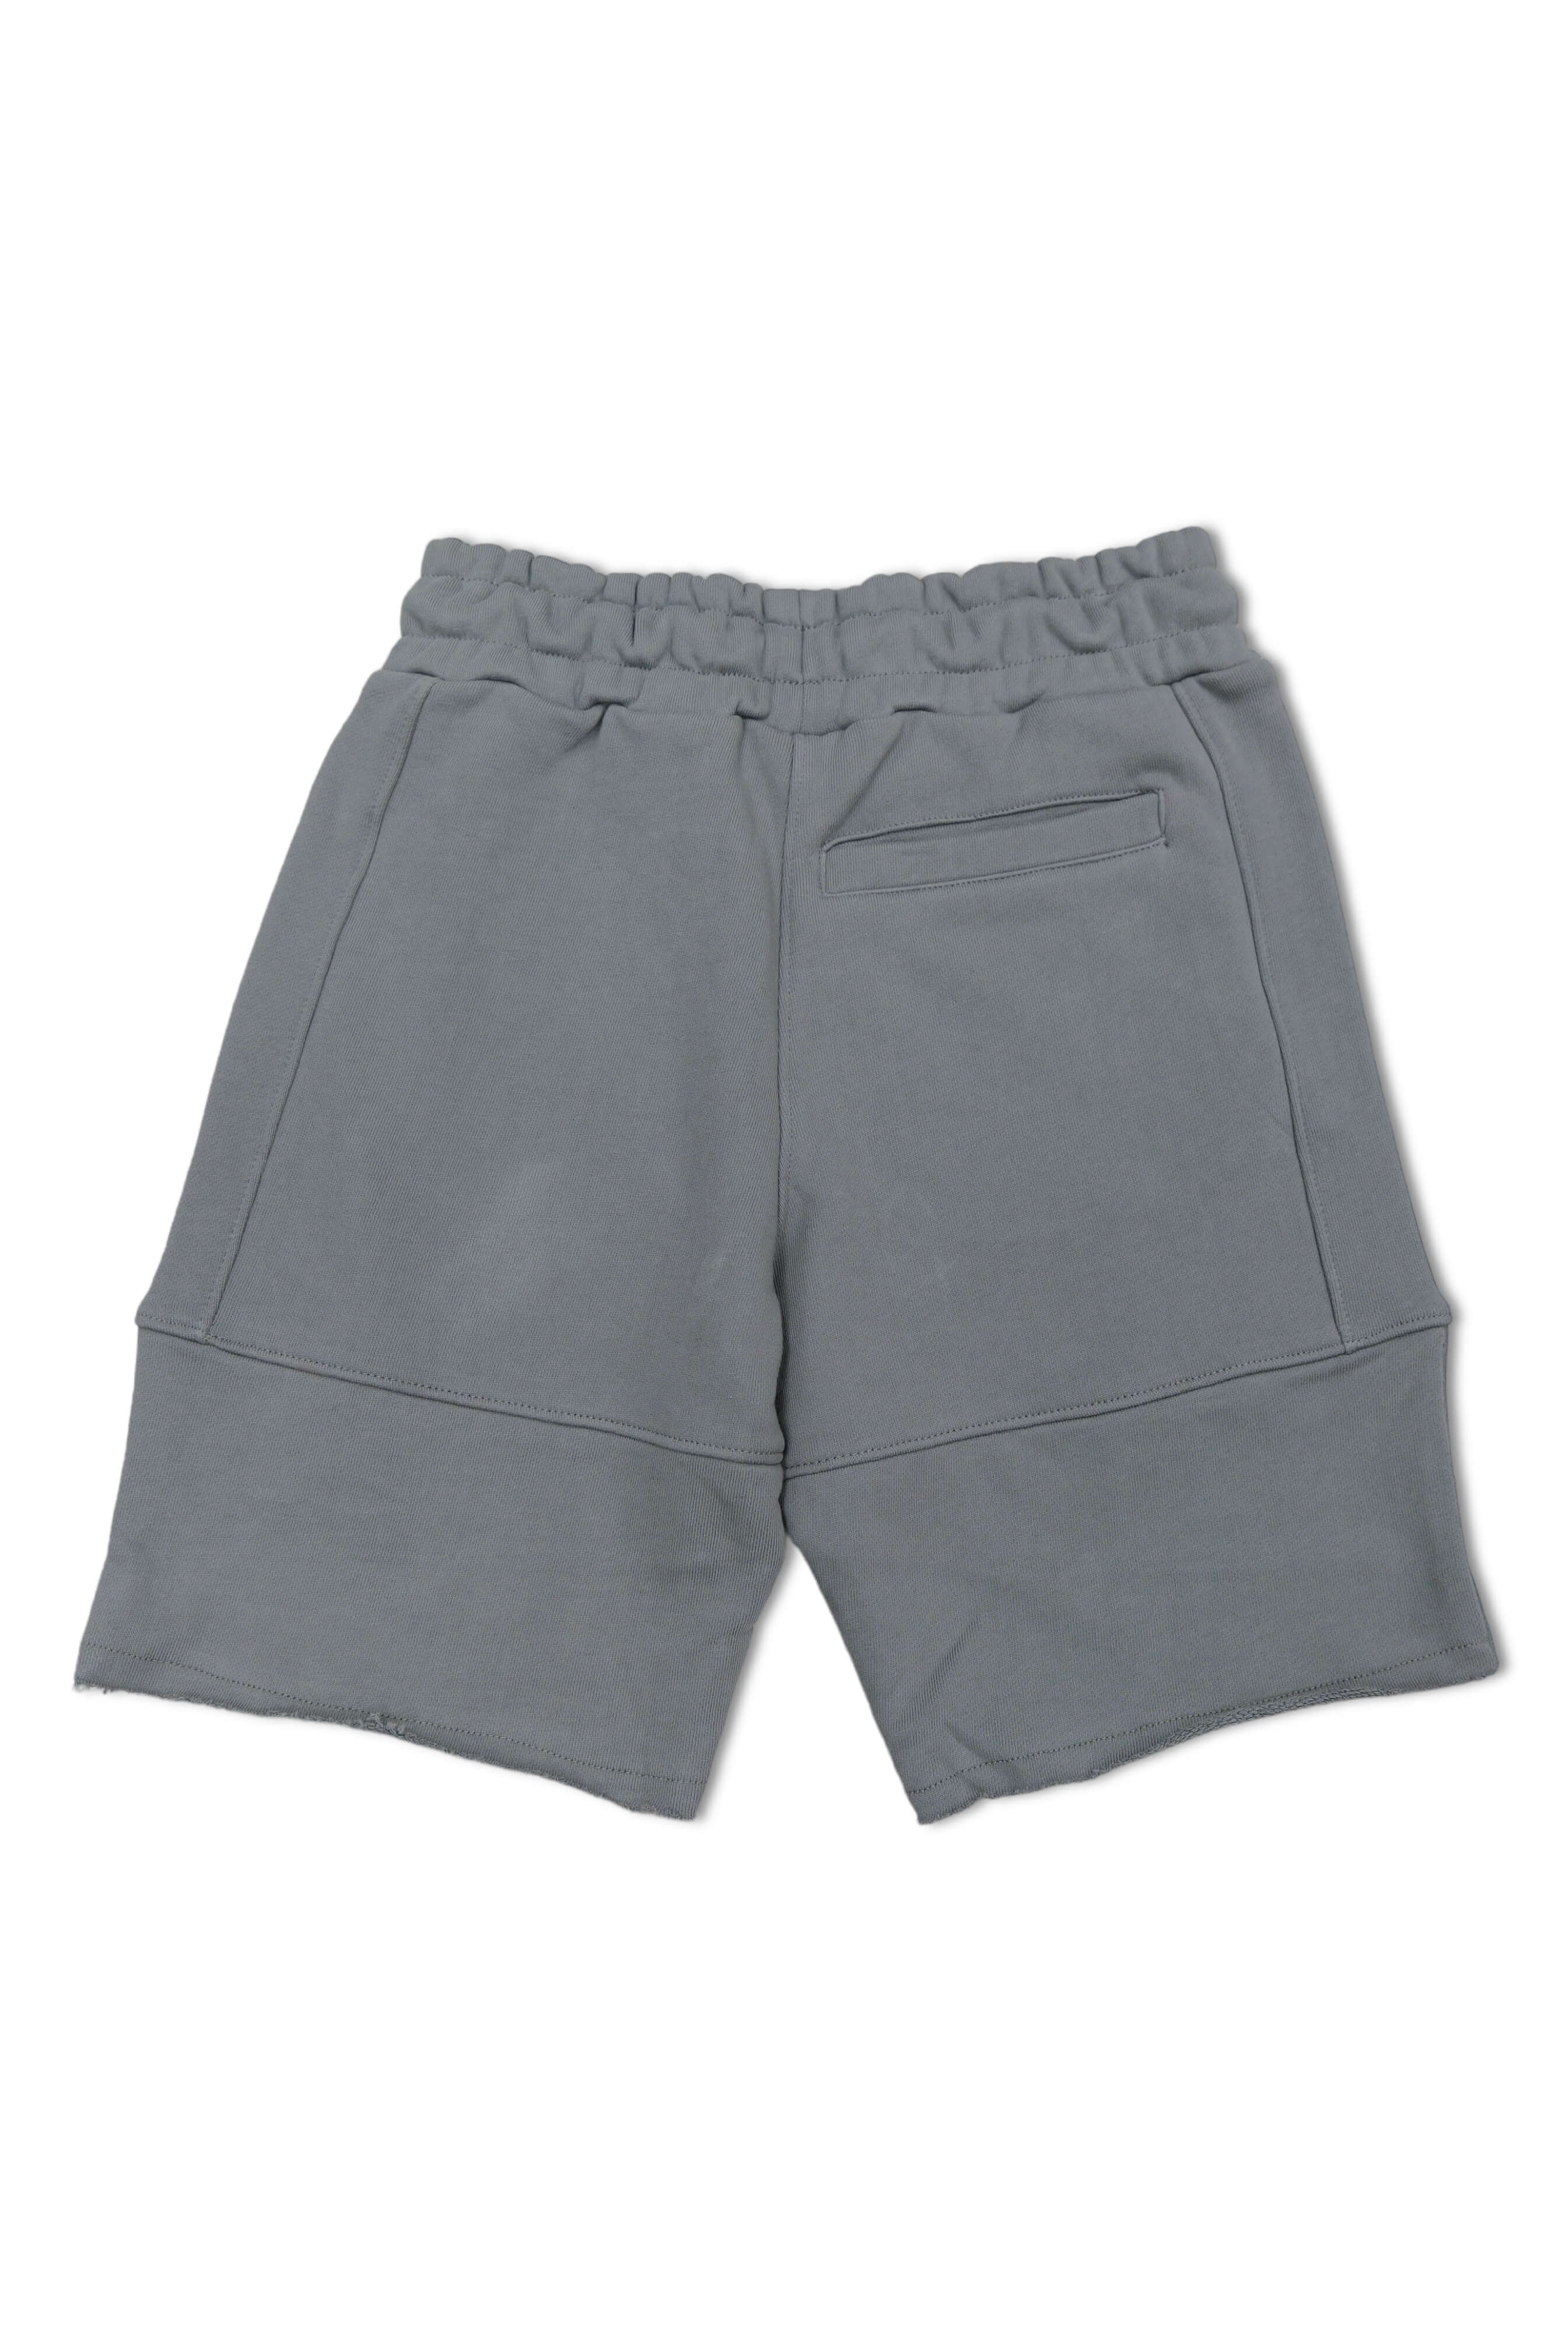 G West Sweat Shorts -Charcoal Grey